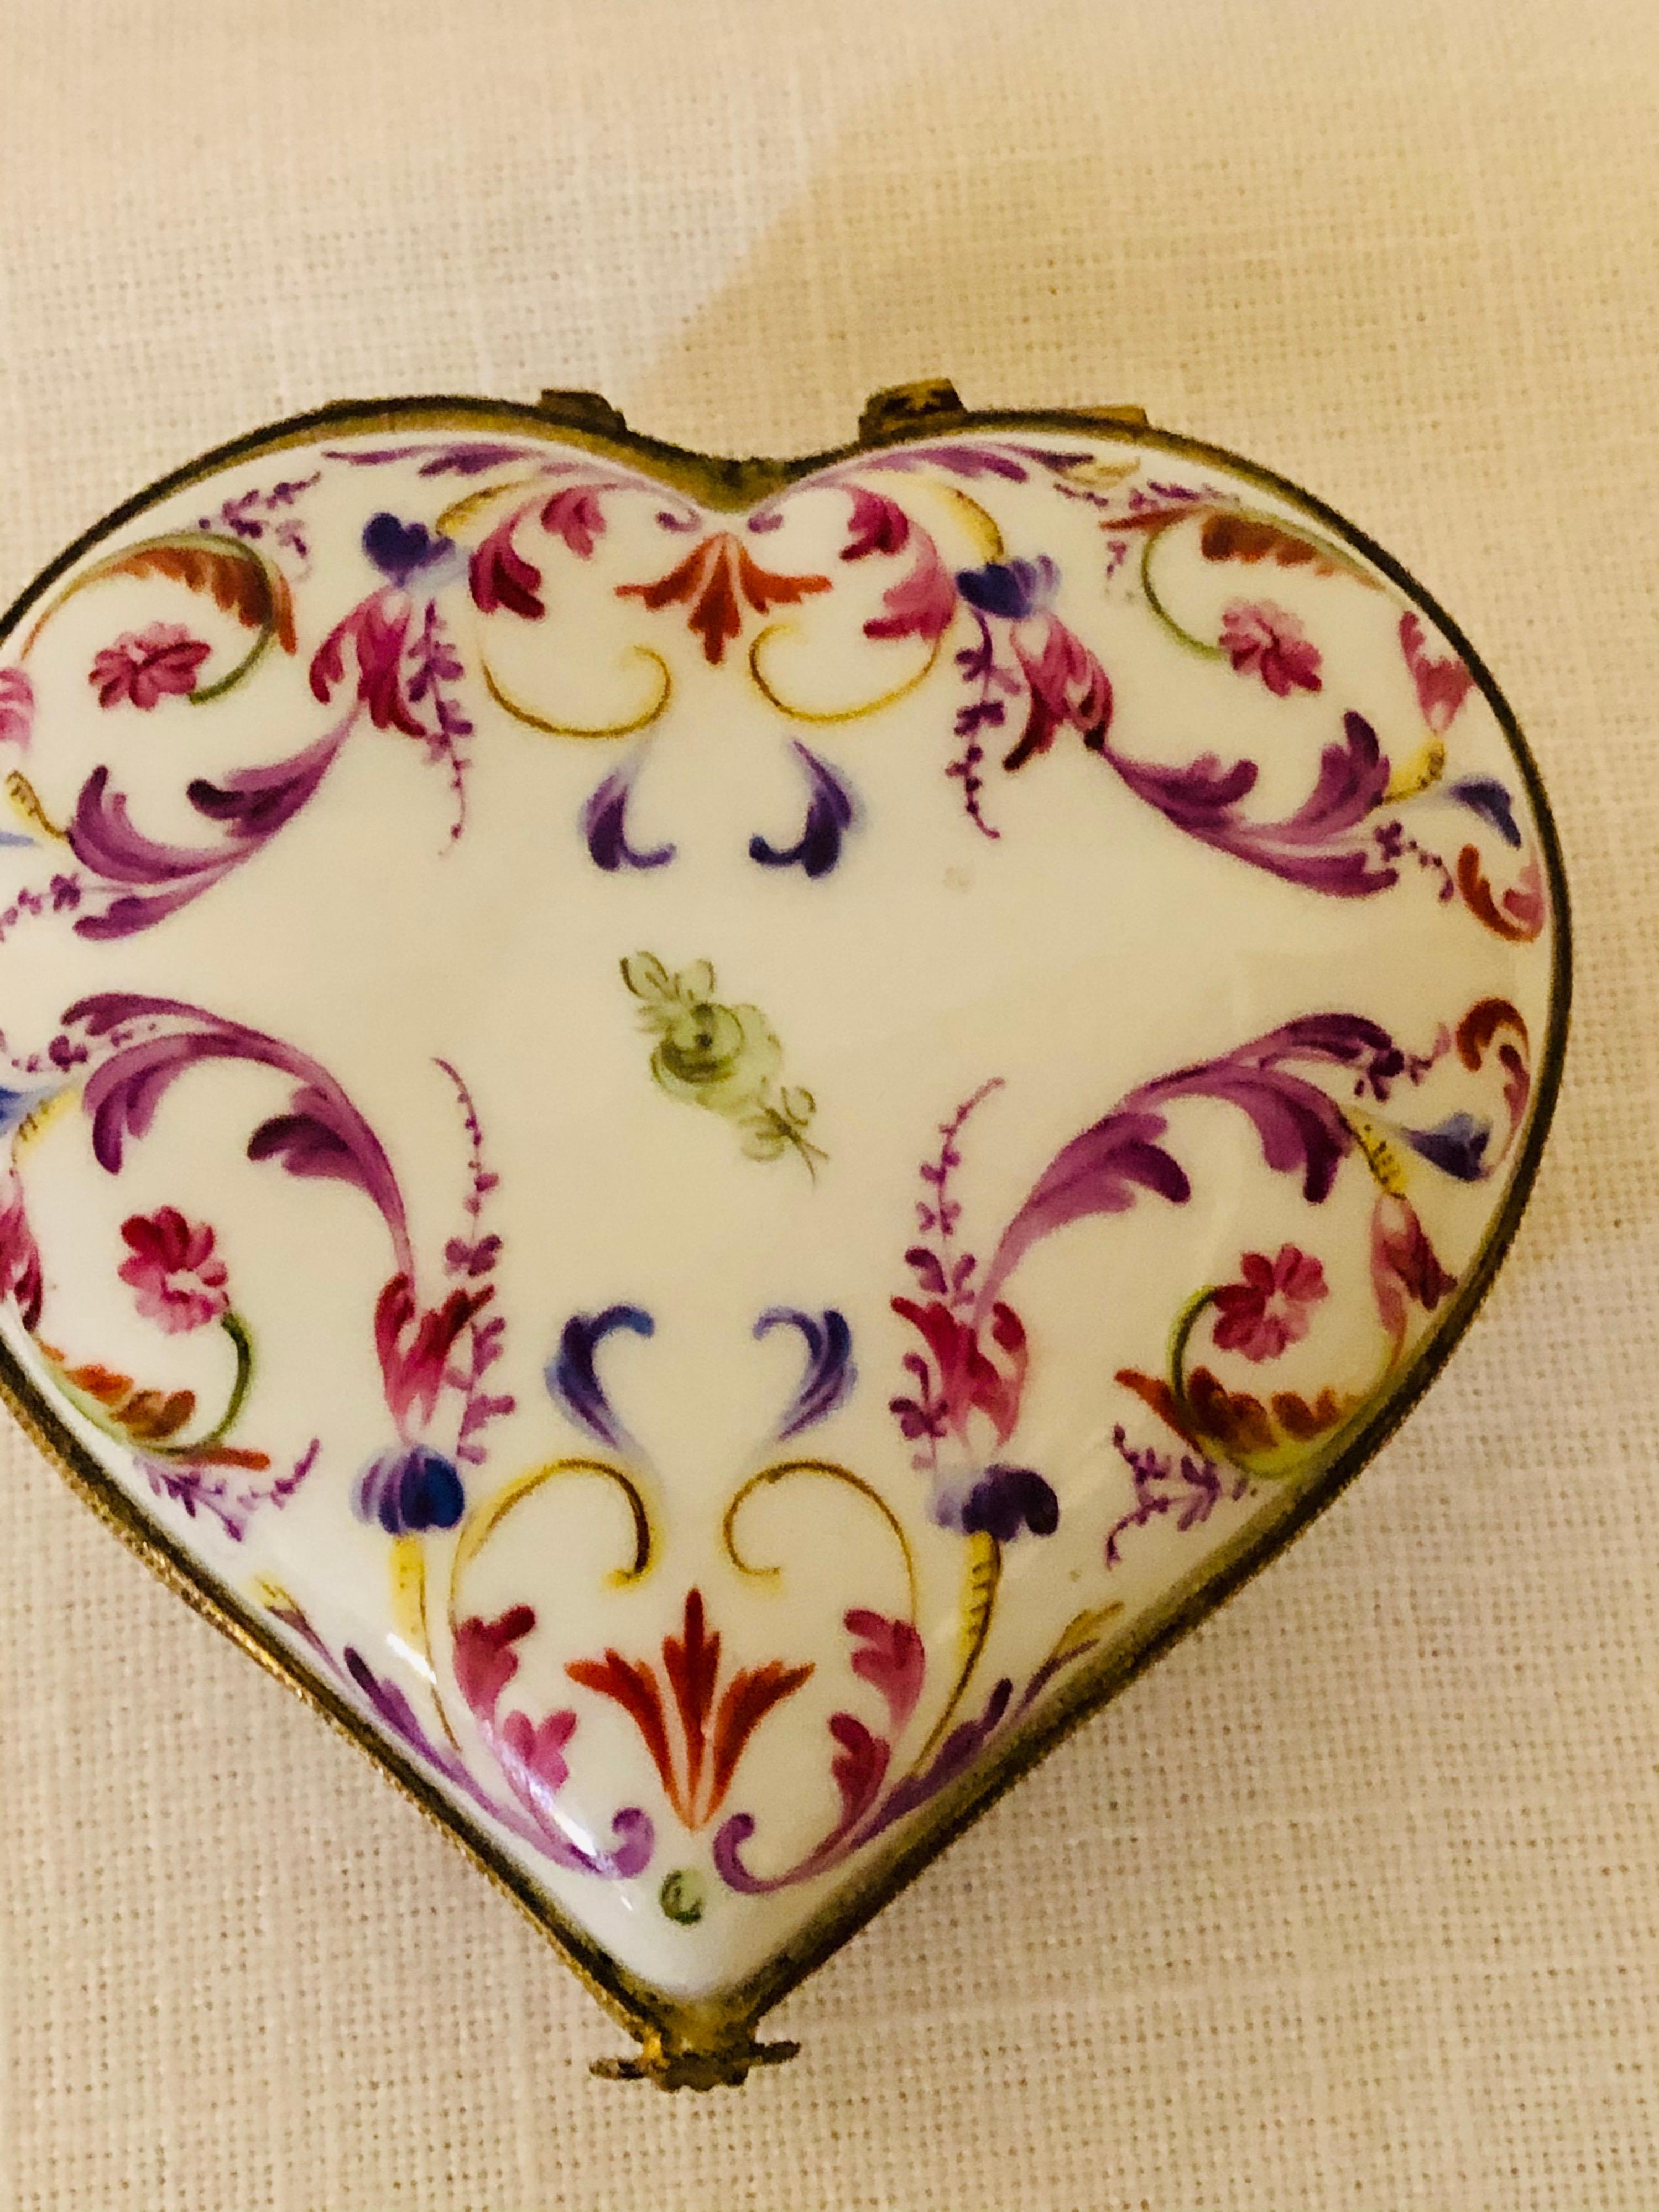 Le Tallec Heart Shape Box Hand-Painted with a Colorful Arabesque Decoration 1